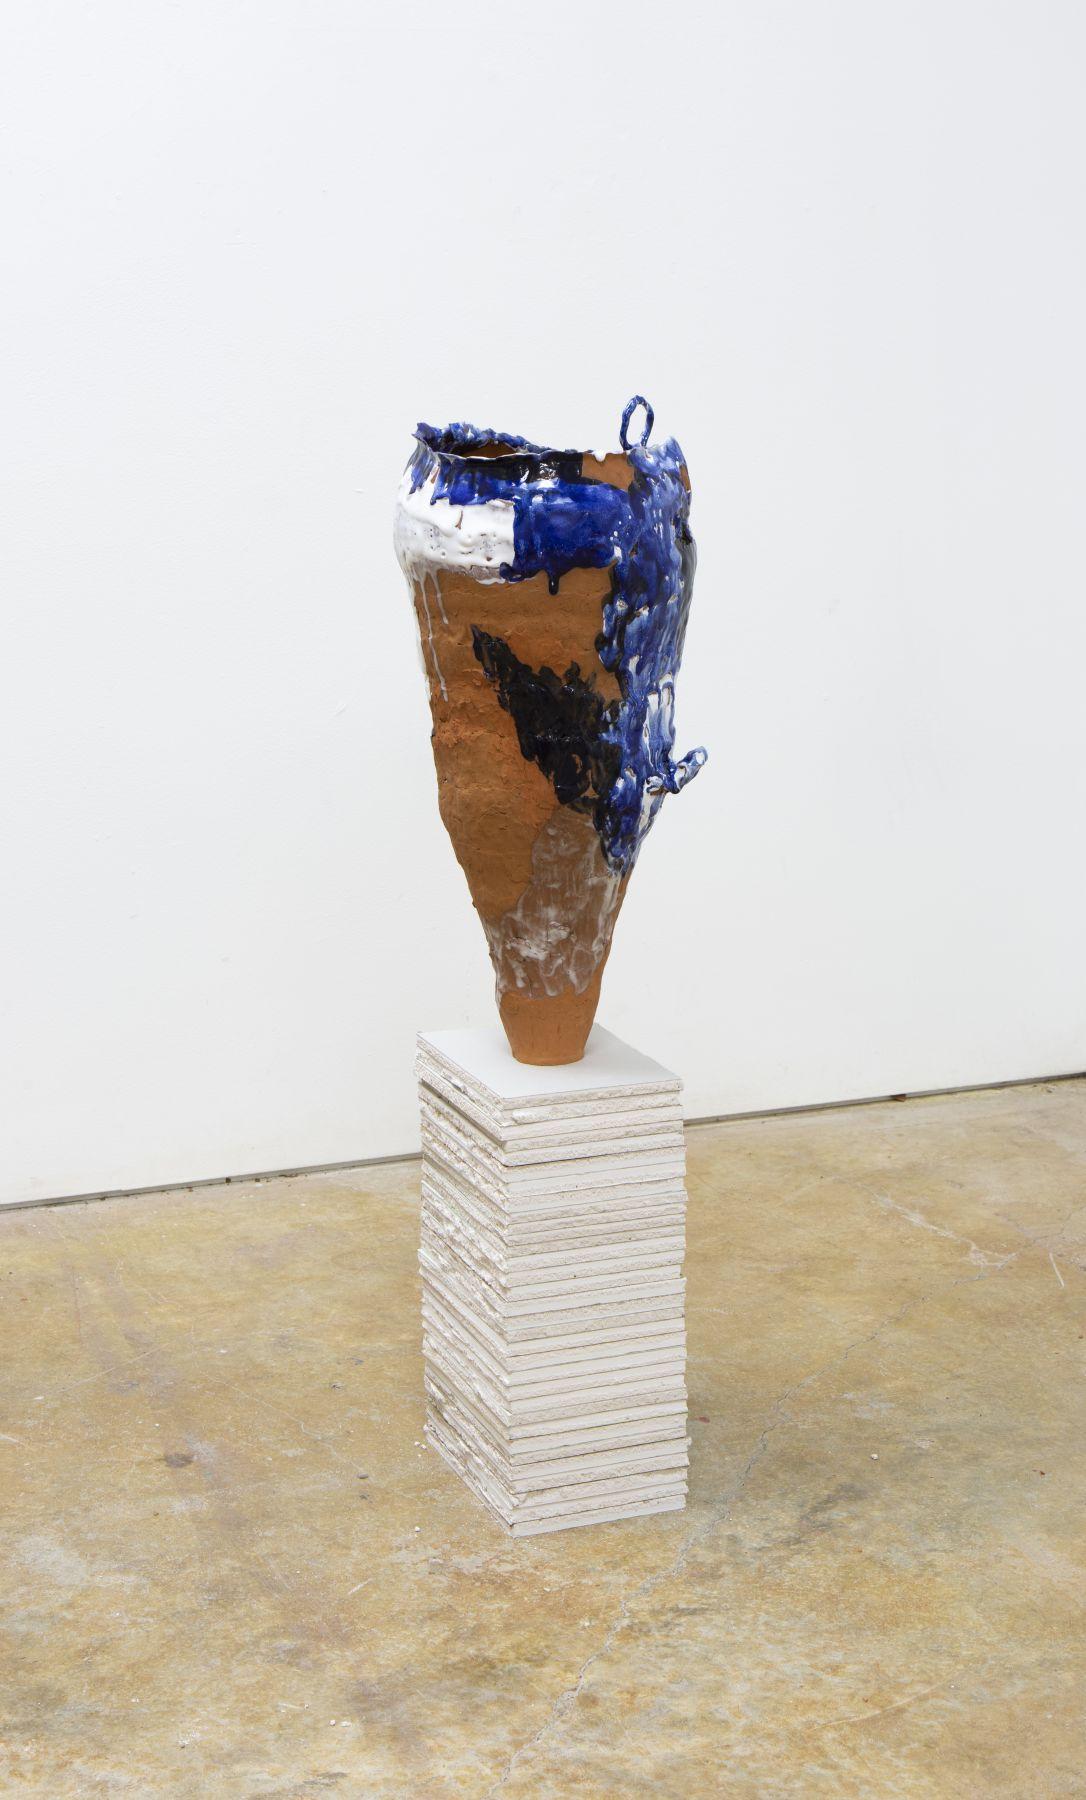 Untitled (water, lows, and blue) - Sculpture by Sam Mack